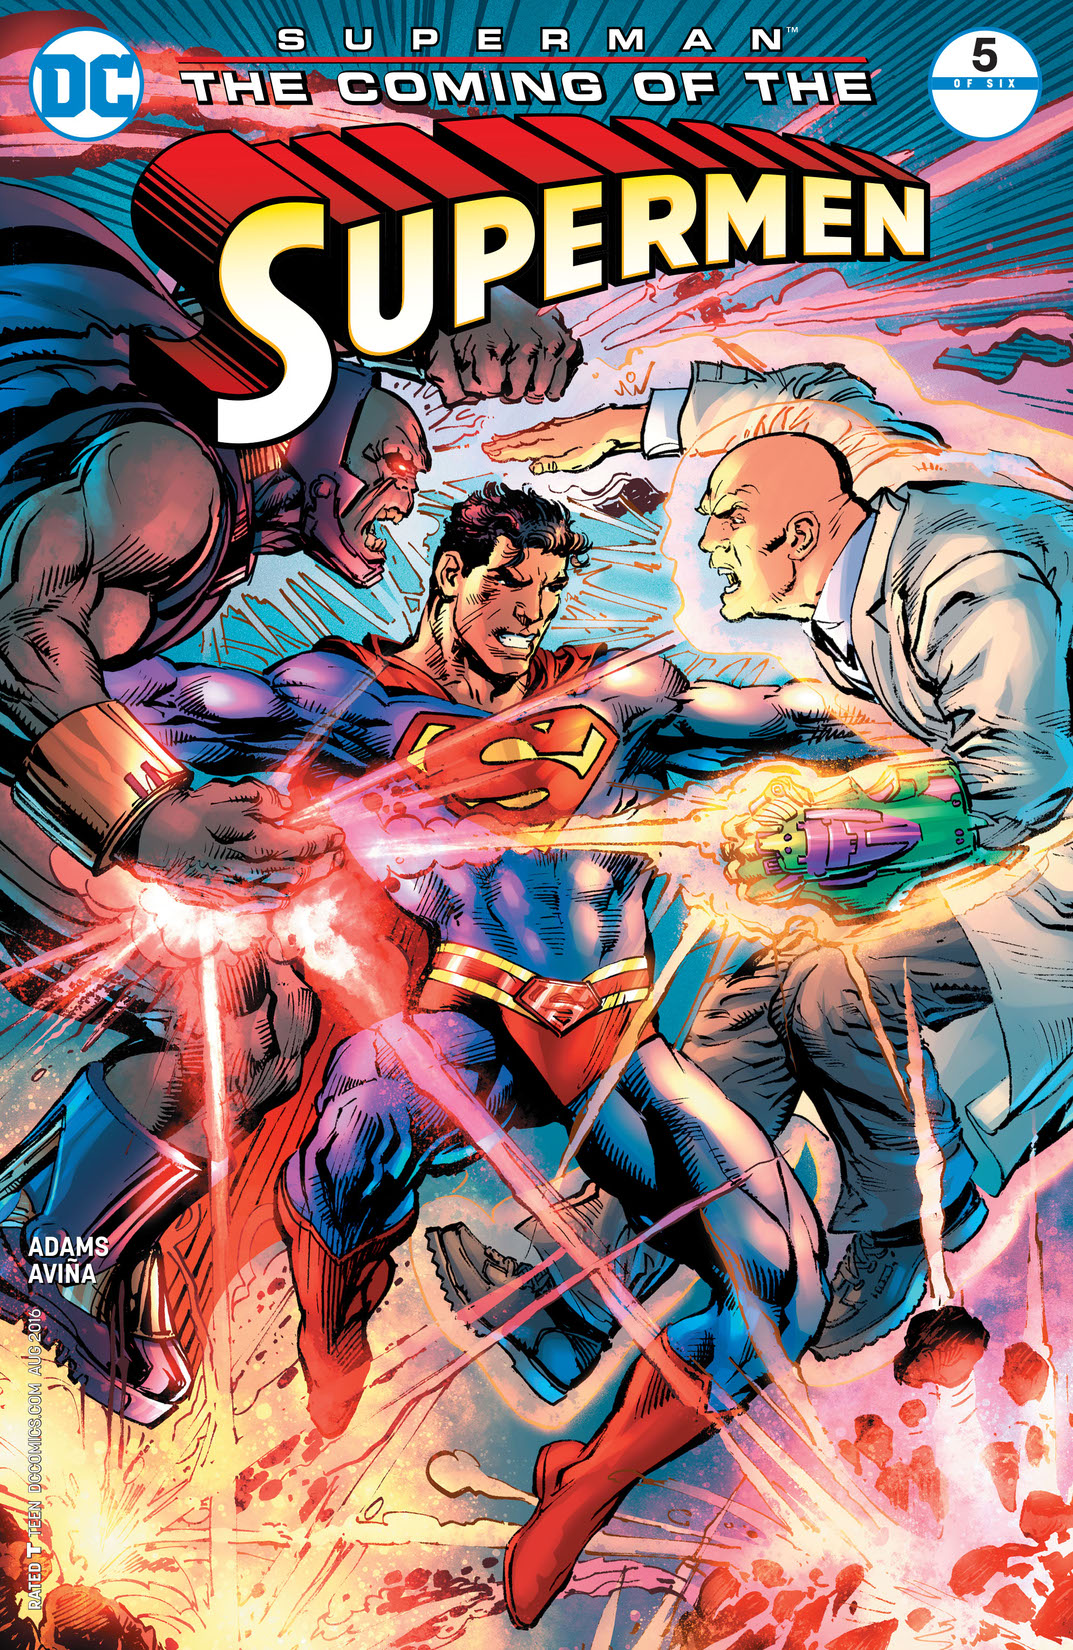 Superman: The Coming of the Supermen #5 preview images